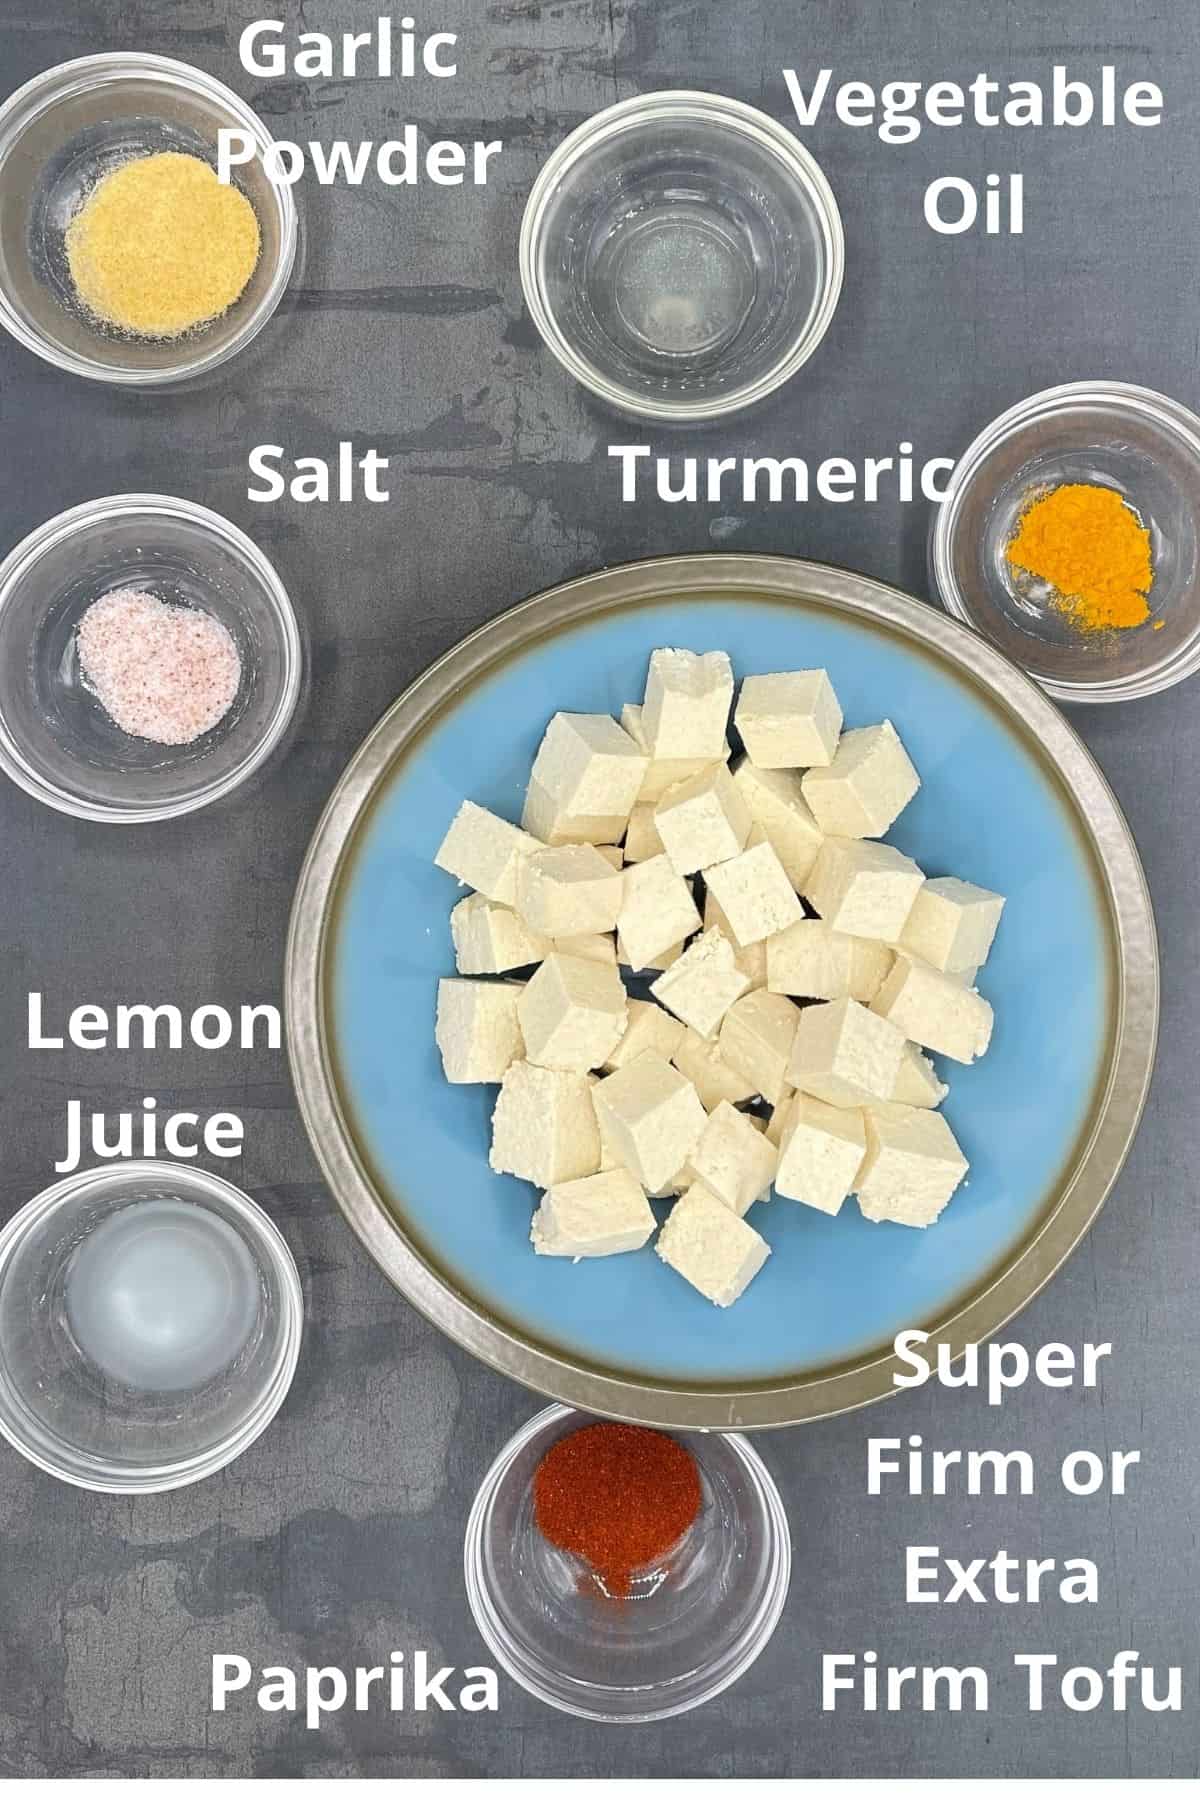 Ingredients for air fryer tofu, with an overlay of the names, including garlic powder, vegetable oil, salt, turmeric, lemon juice, paprika and tofu.